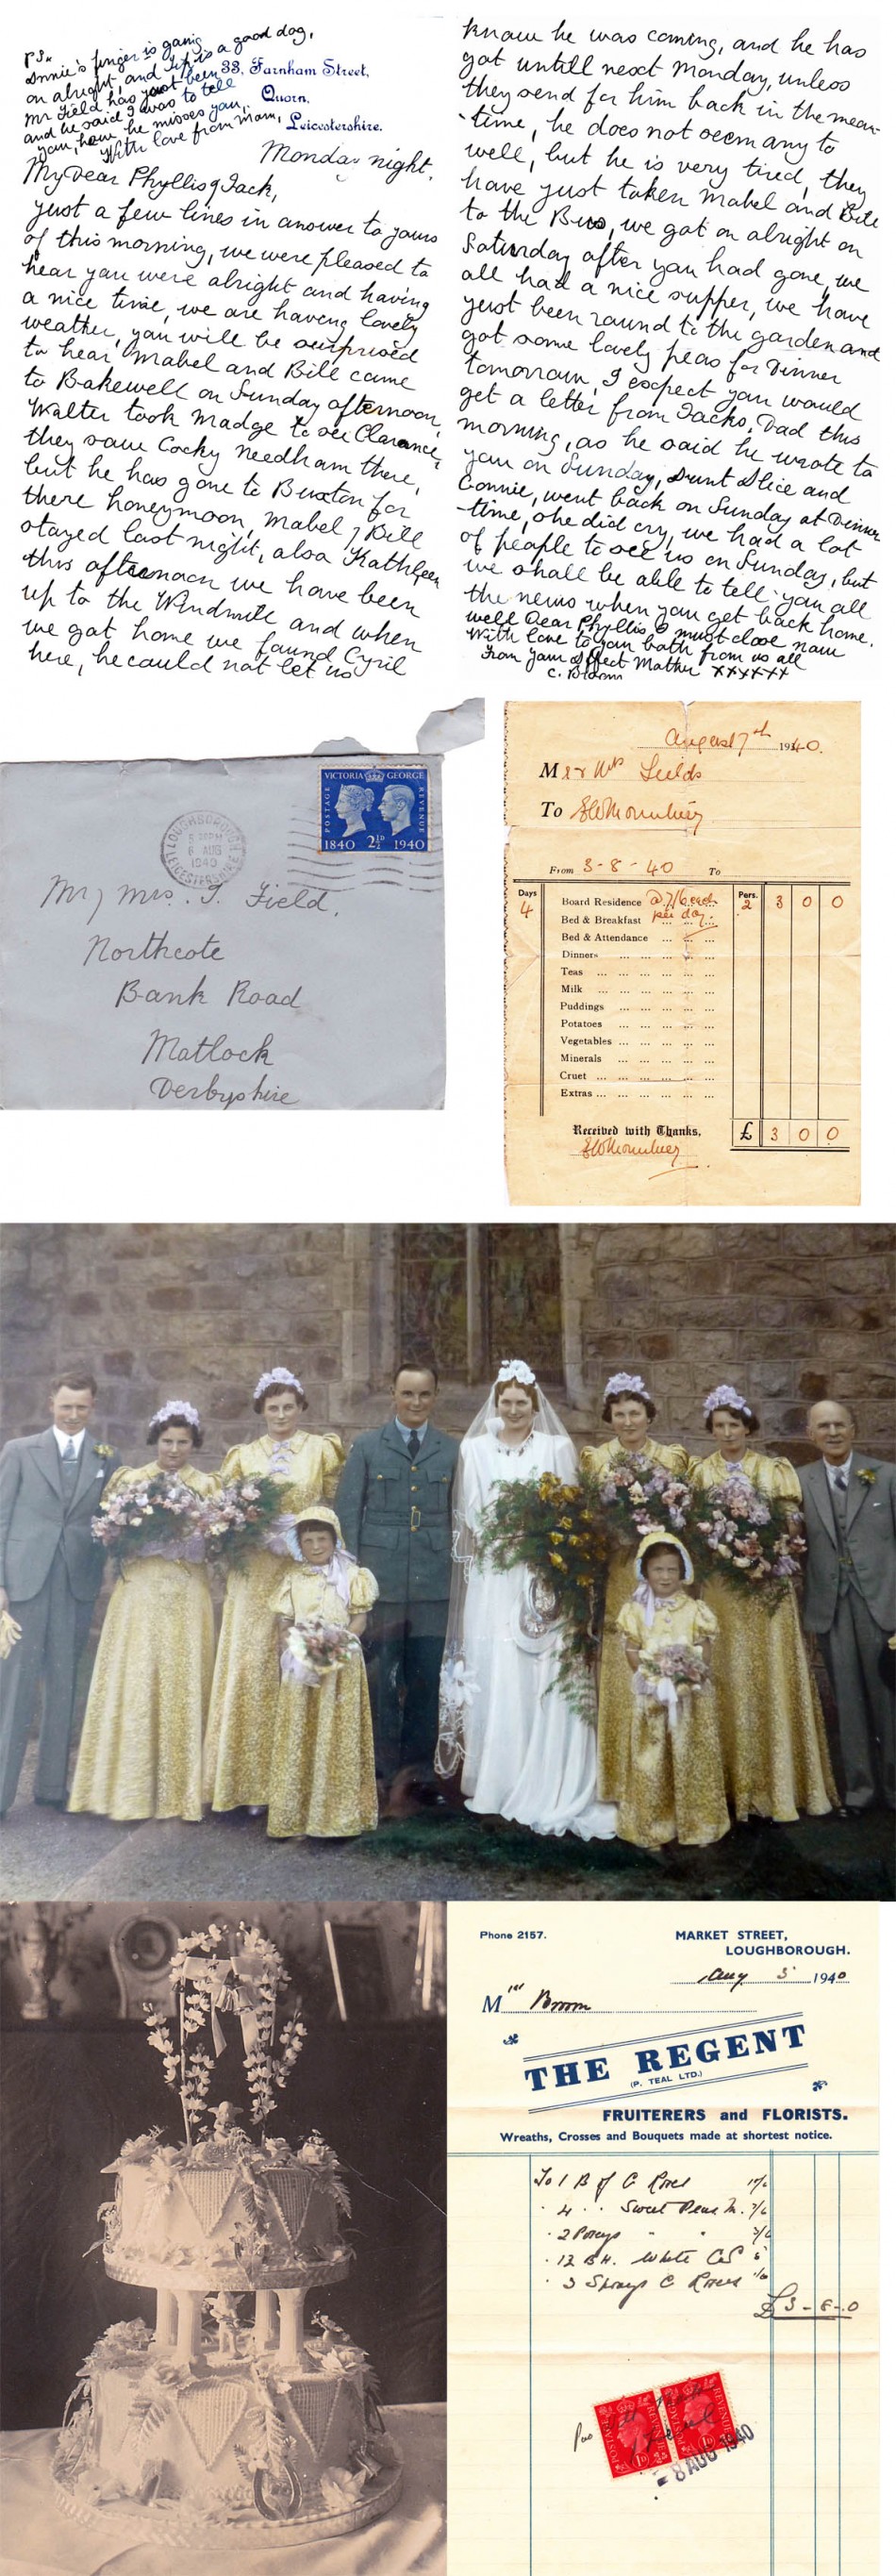 The marriage of Phyllis Broom and John Field, August 3rd 1940  photograph, letters and honeymoon